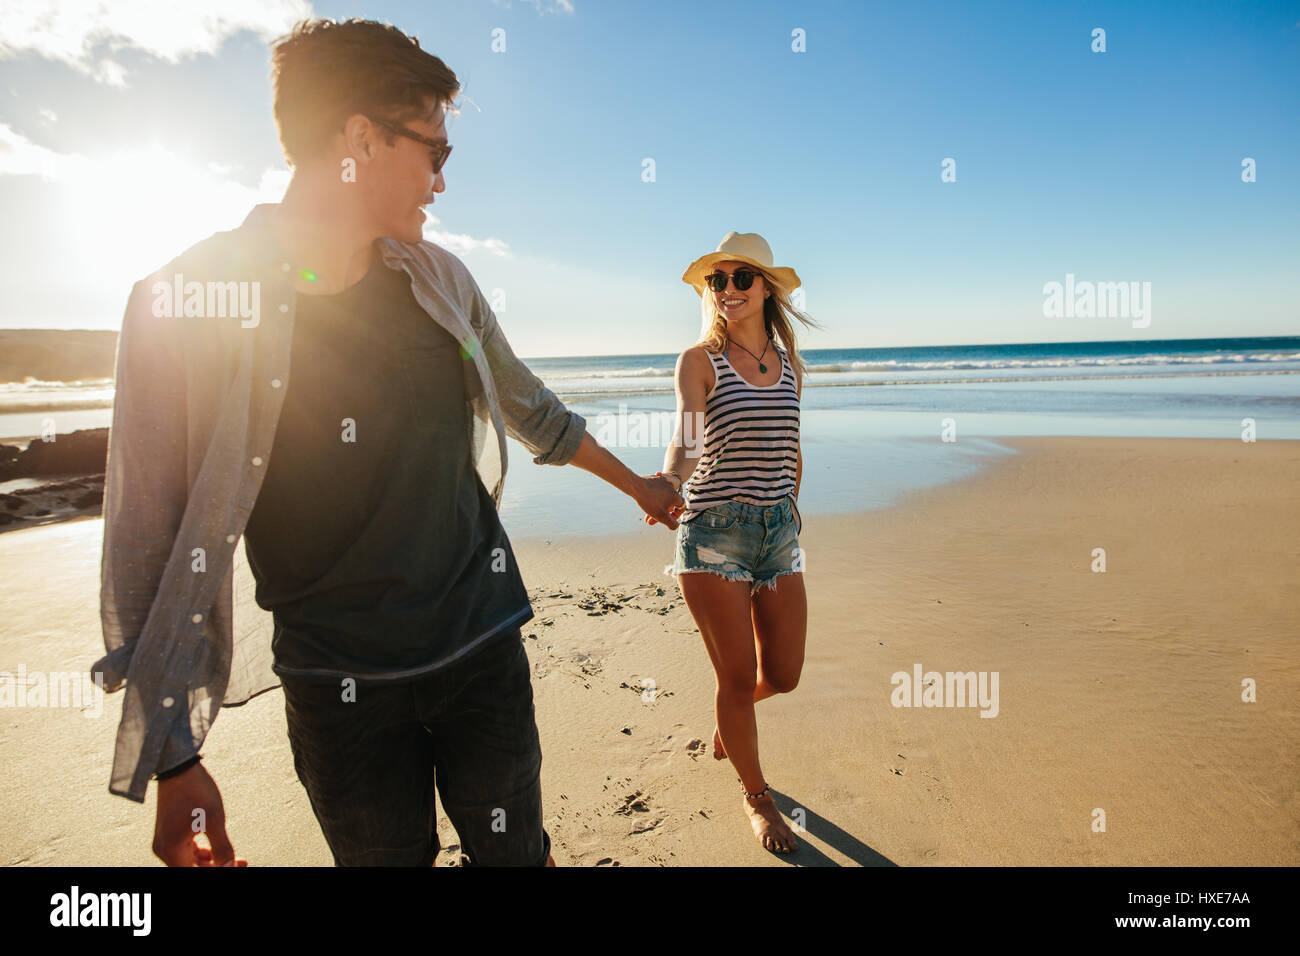 Outdoor shot of romantic young couple holding hands and walking on beach. Young man and woman walking on seashore on a summer day. Stock Photo